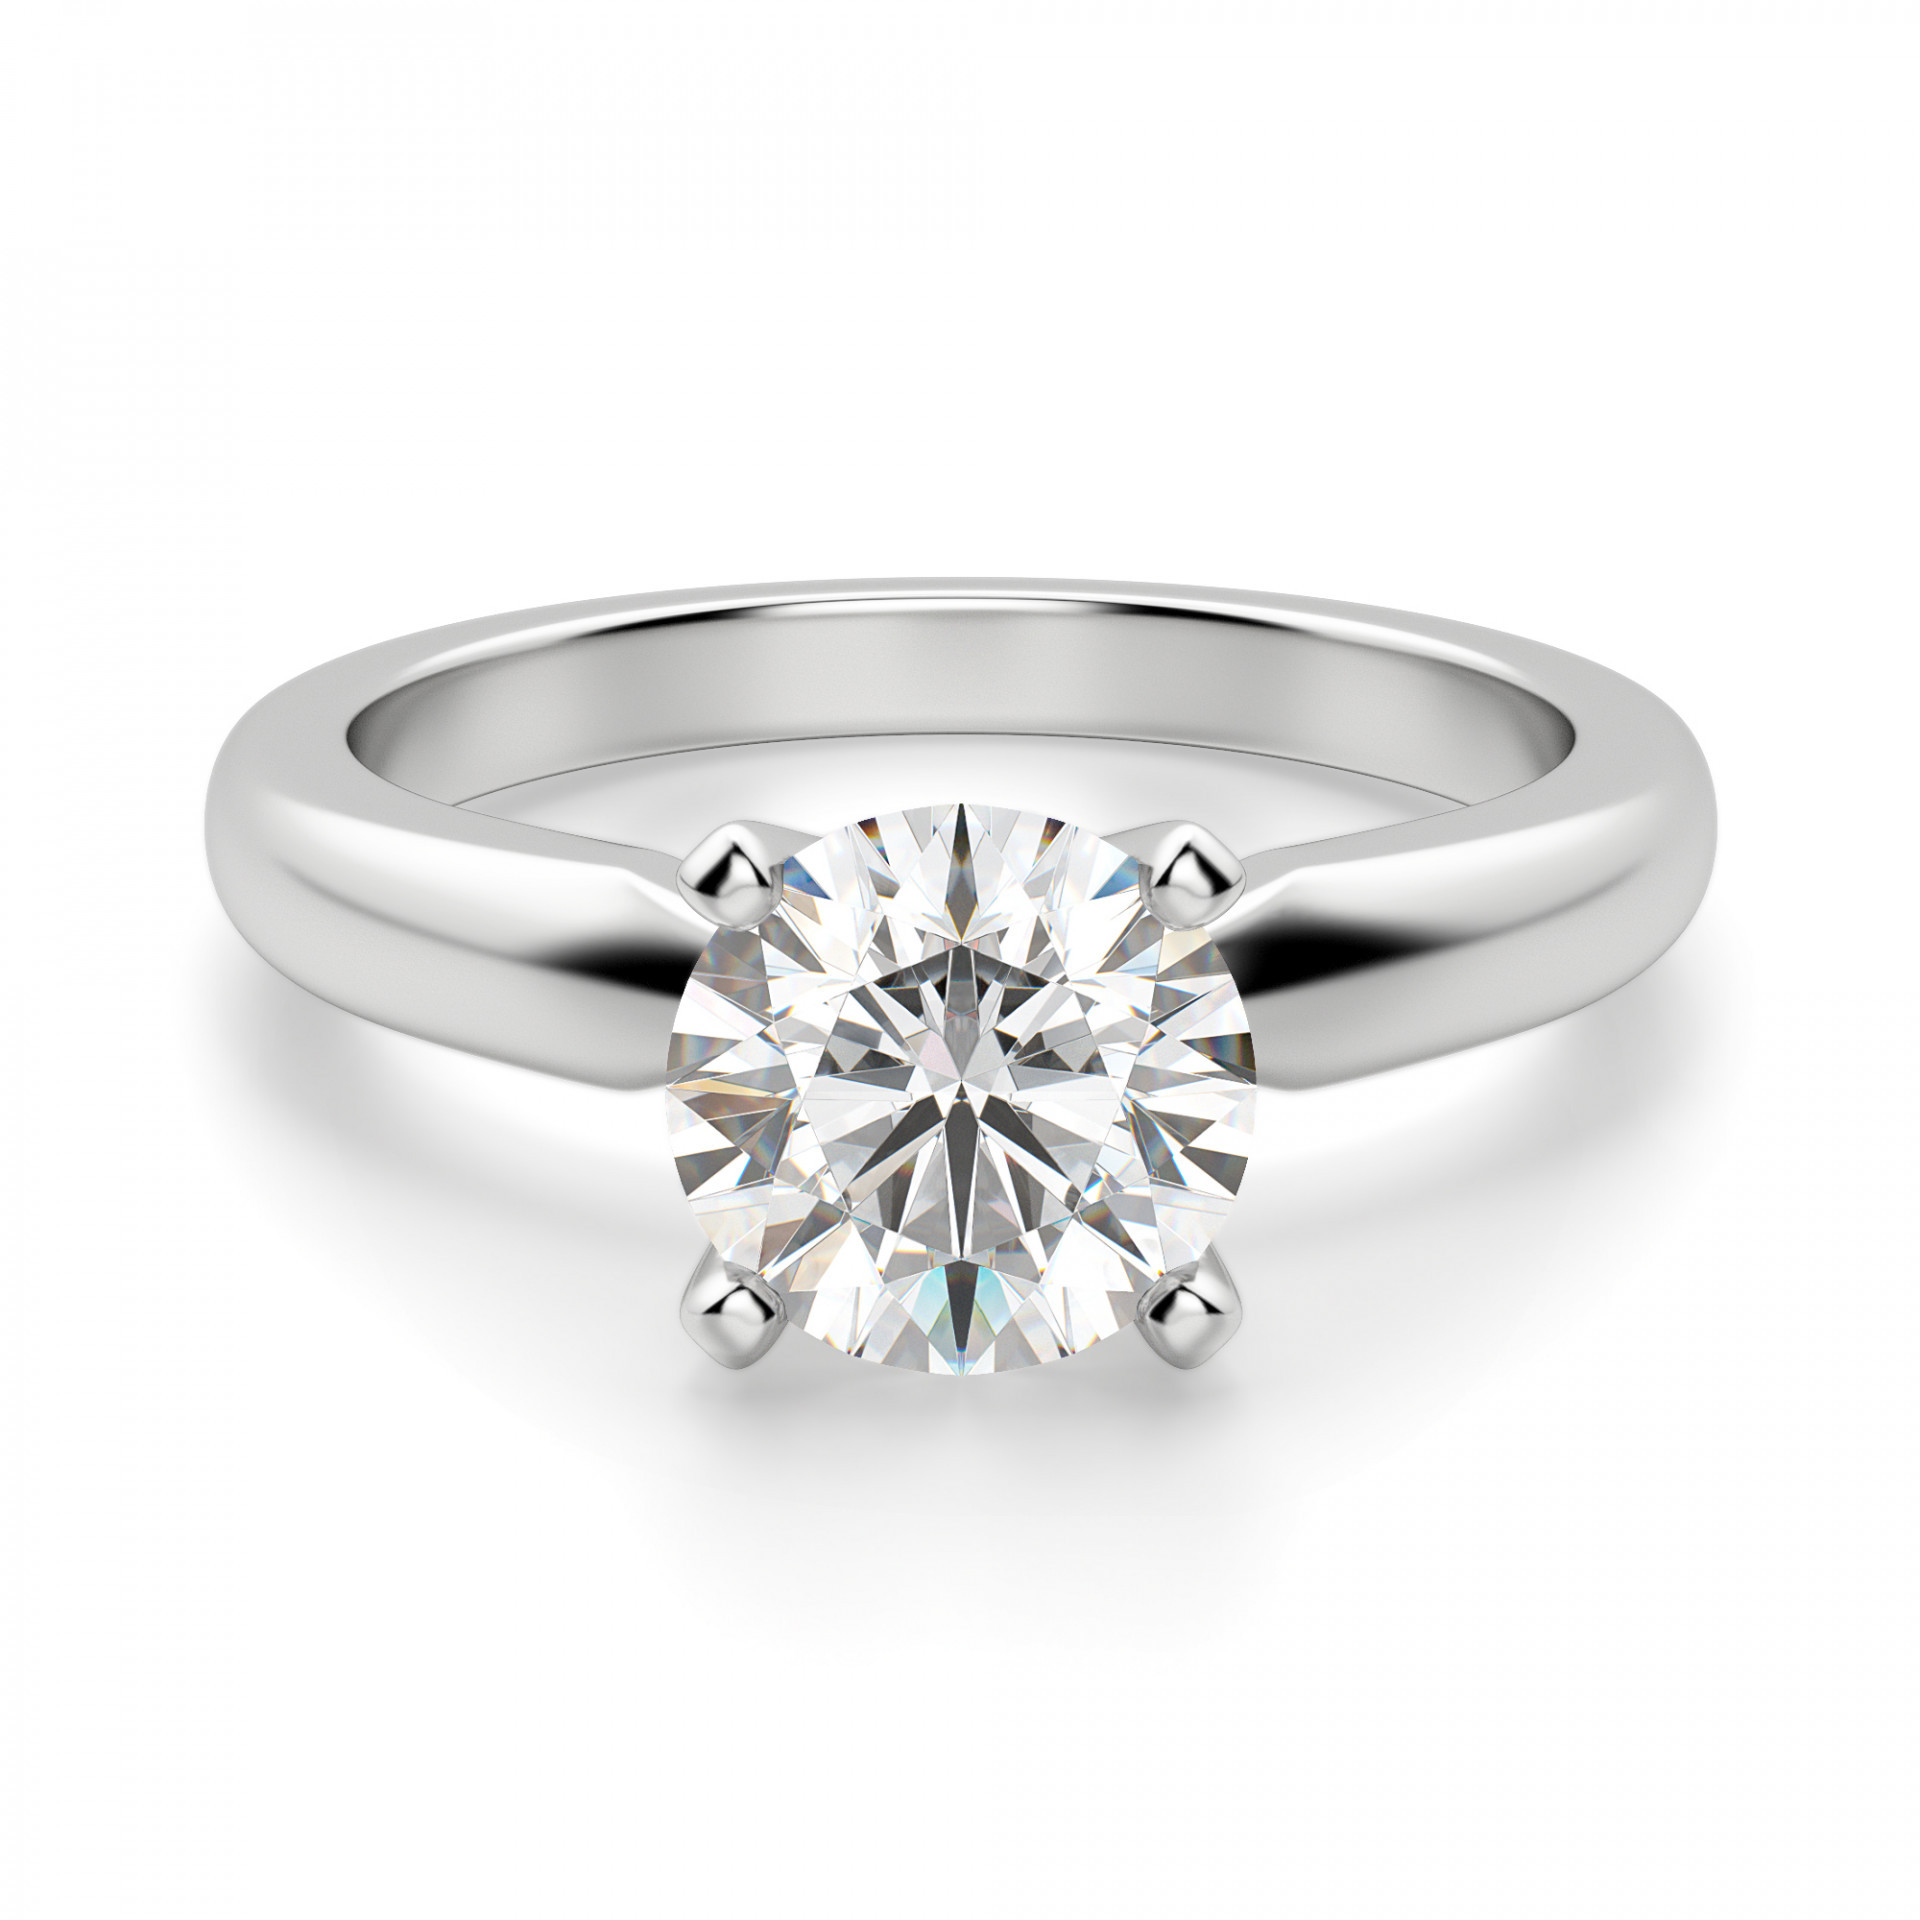 Tiffany Diamond Rings
 Tiffany Style Round Cut Solitaire Engagement Ring